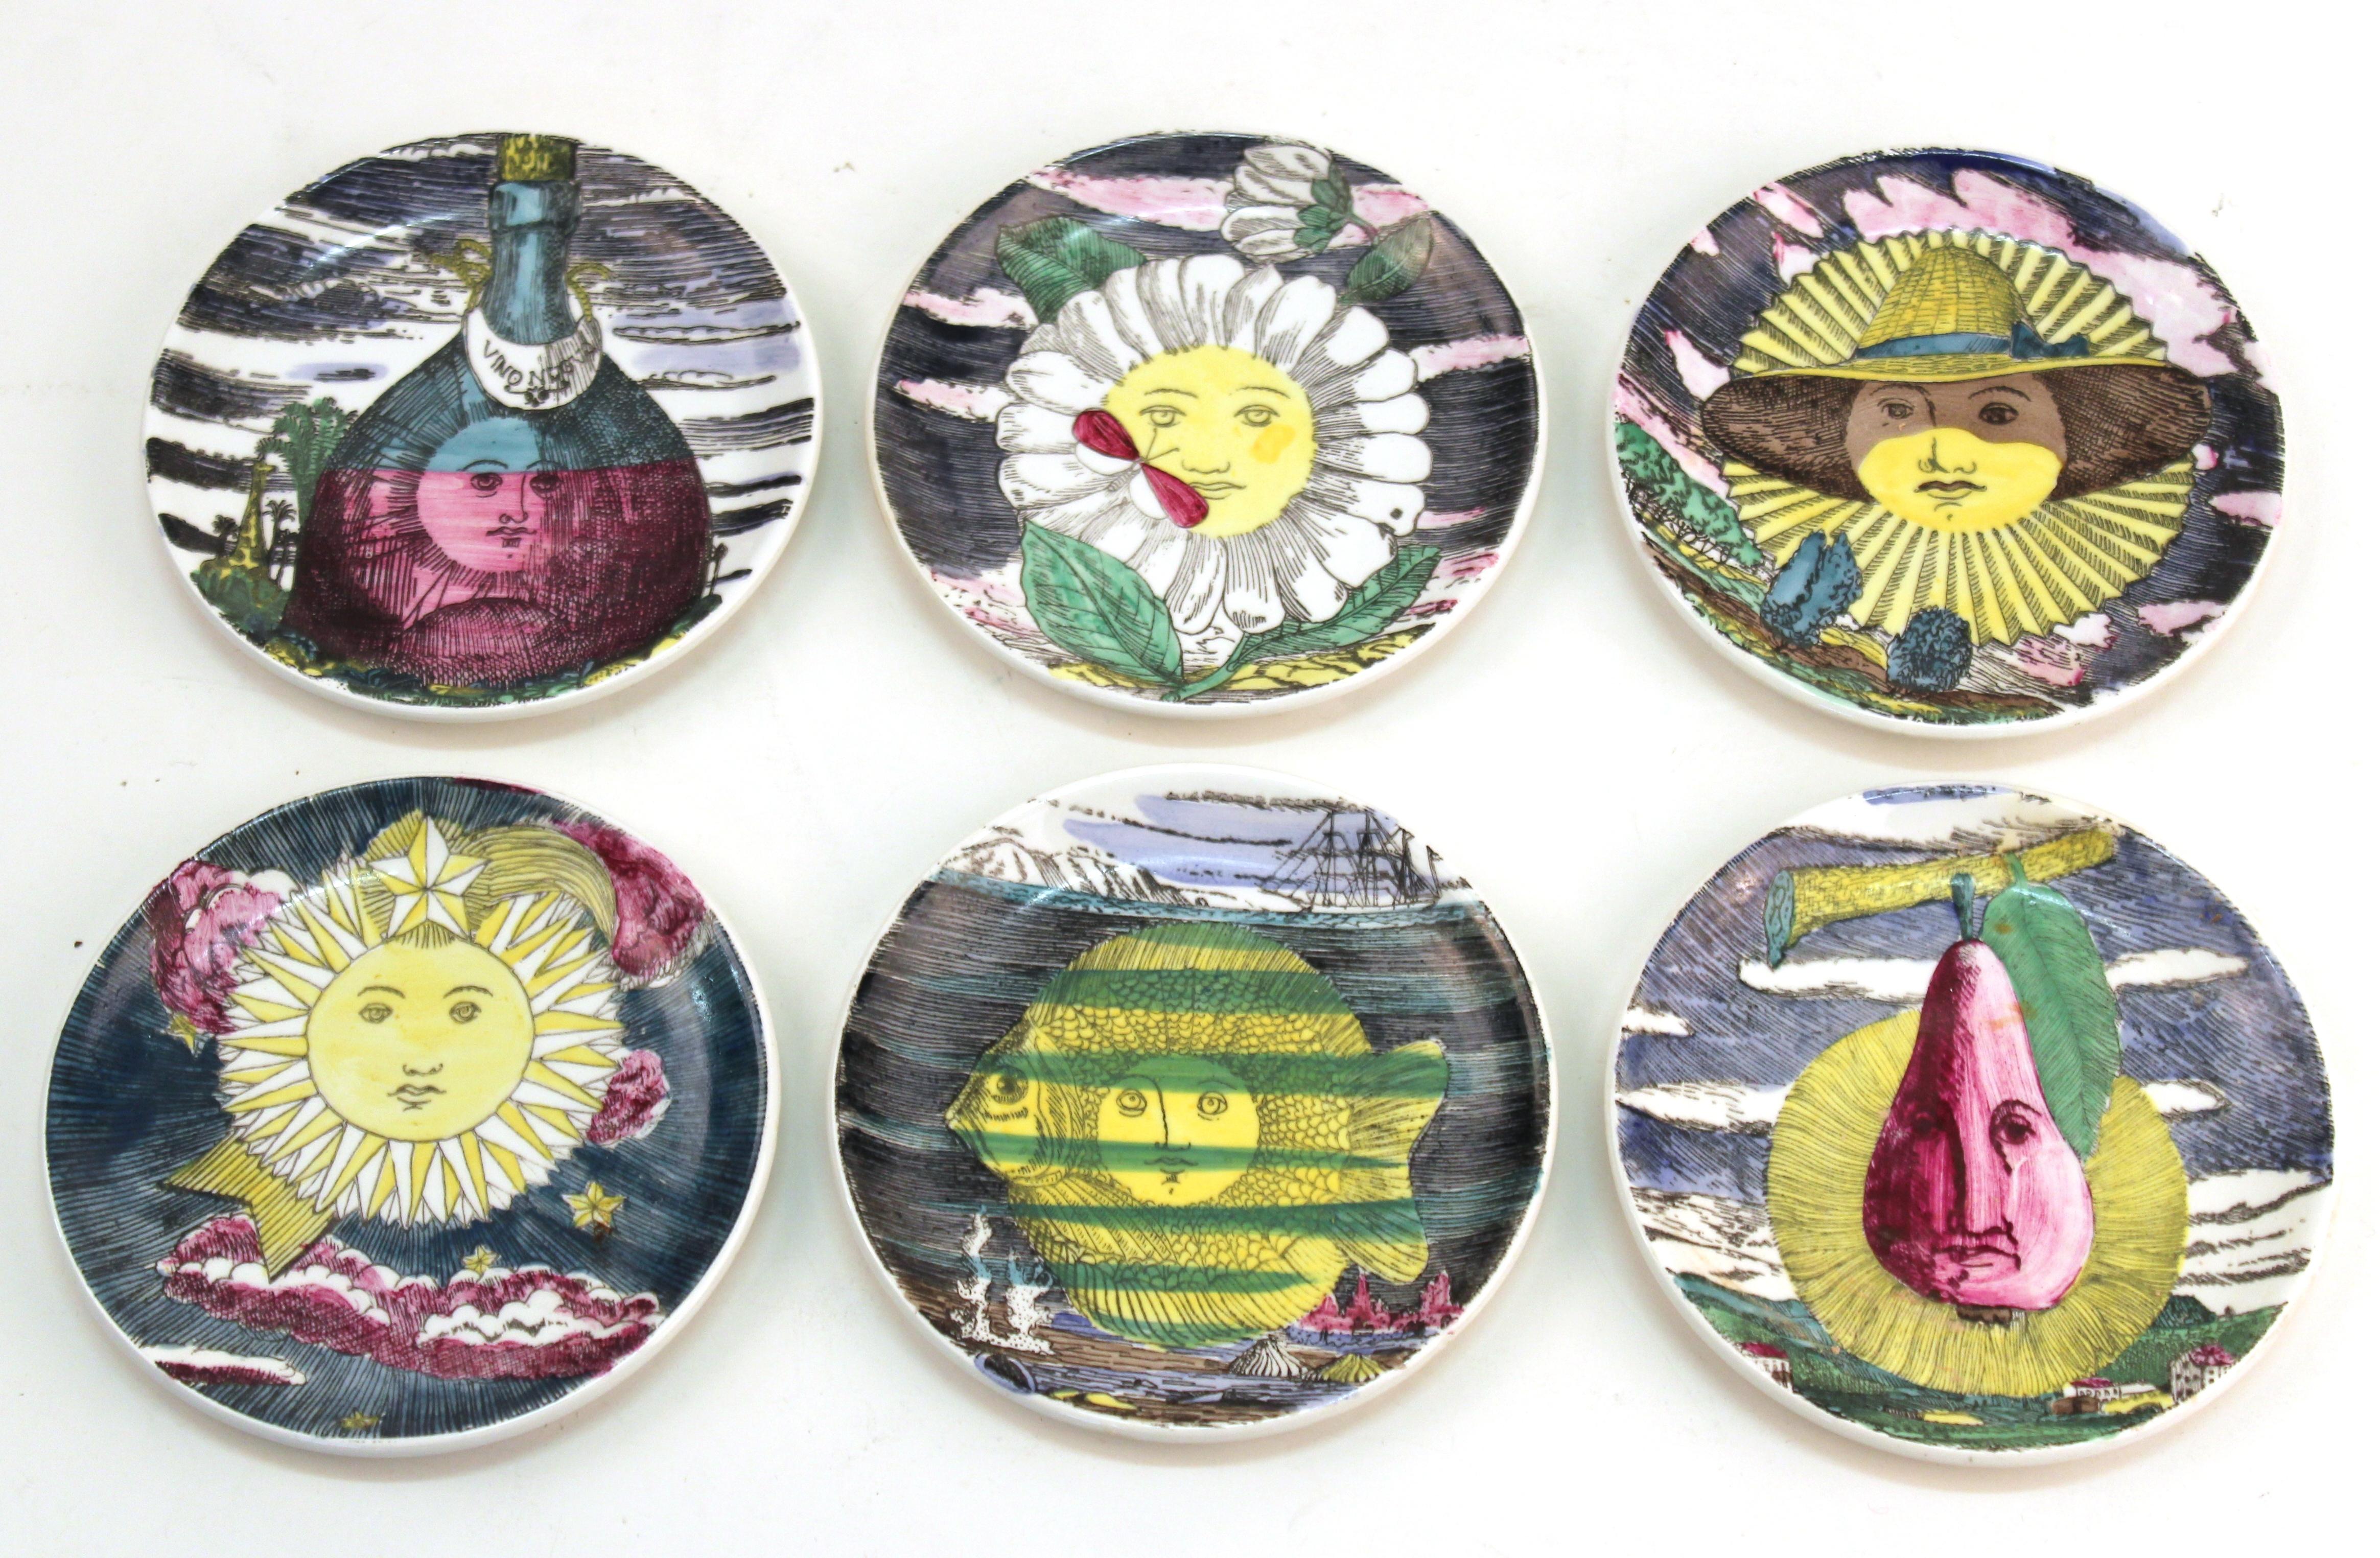 Italian Mid-Century Modern set of six coasters designed by Piero Fornasetti in the 1960s. The set comes with its original box and showcases a design depicting sun and moon motifs based on illustrations from a lunar almanac from the 1940s. Marked